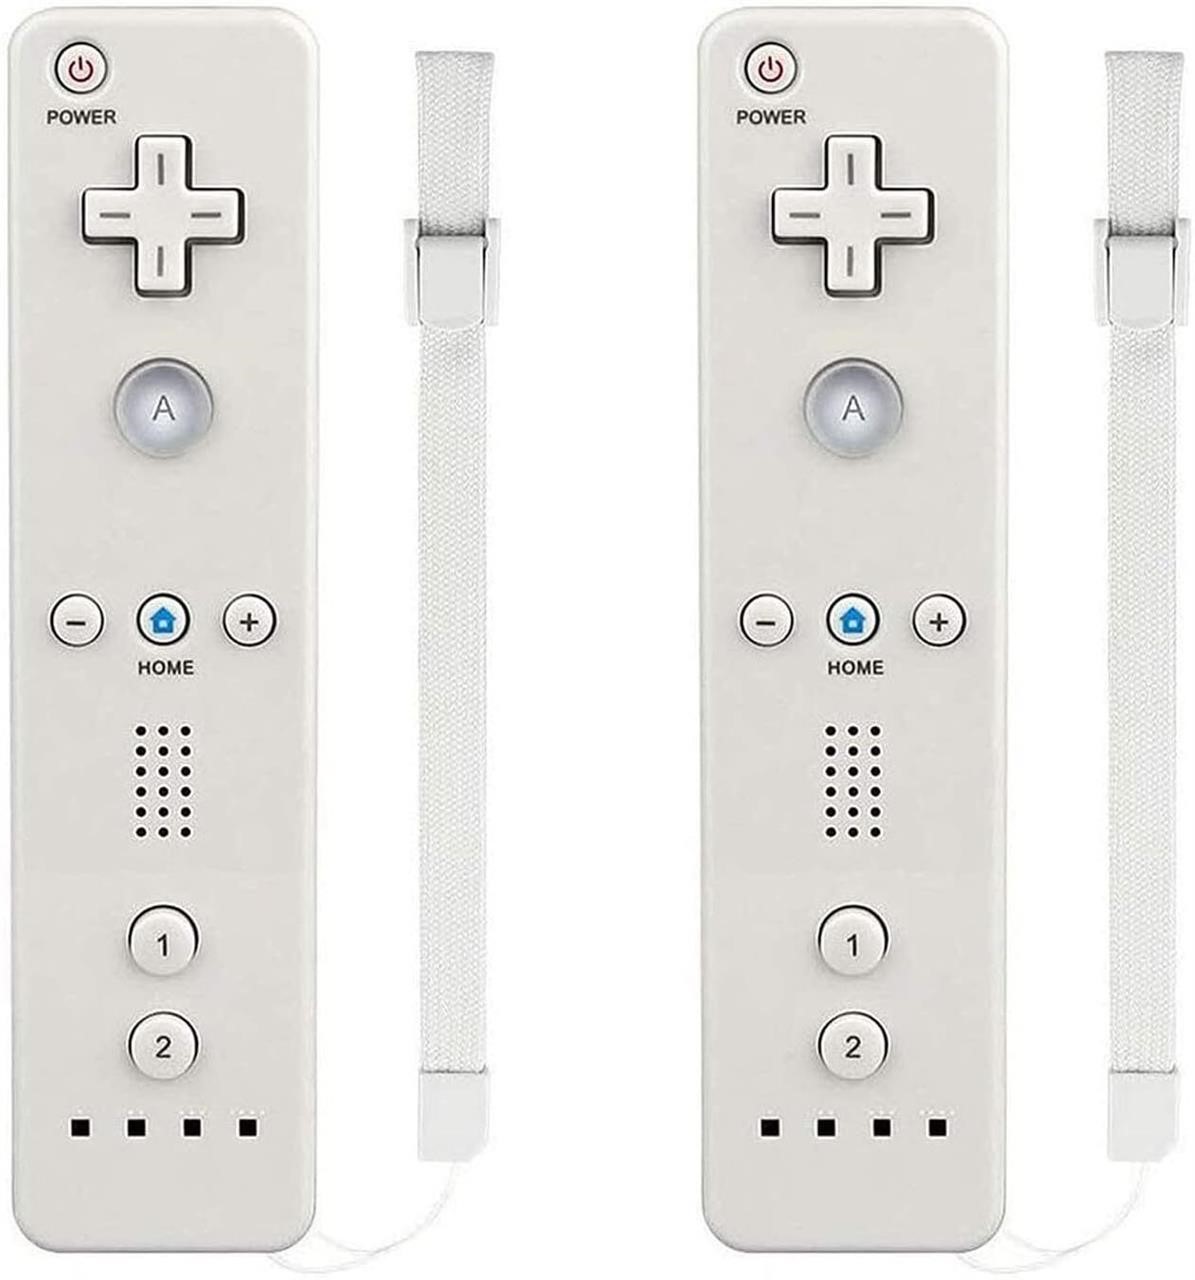 2 Pack Wii Remote Controller for Nintendo Wii/U